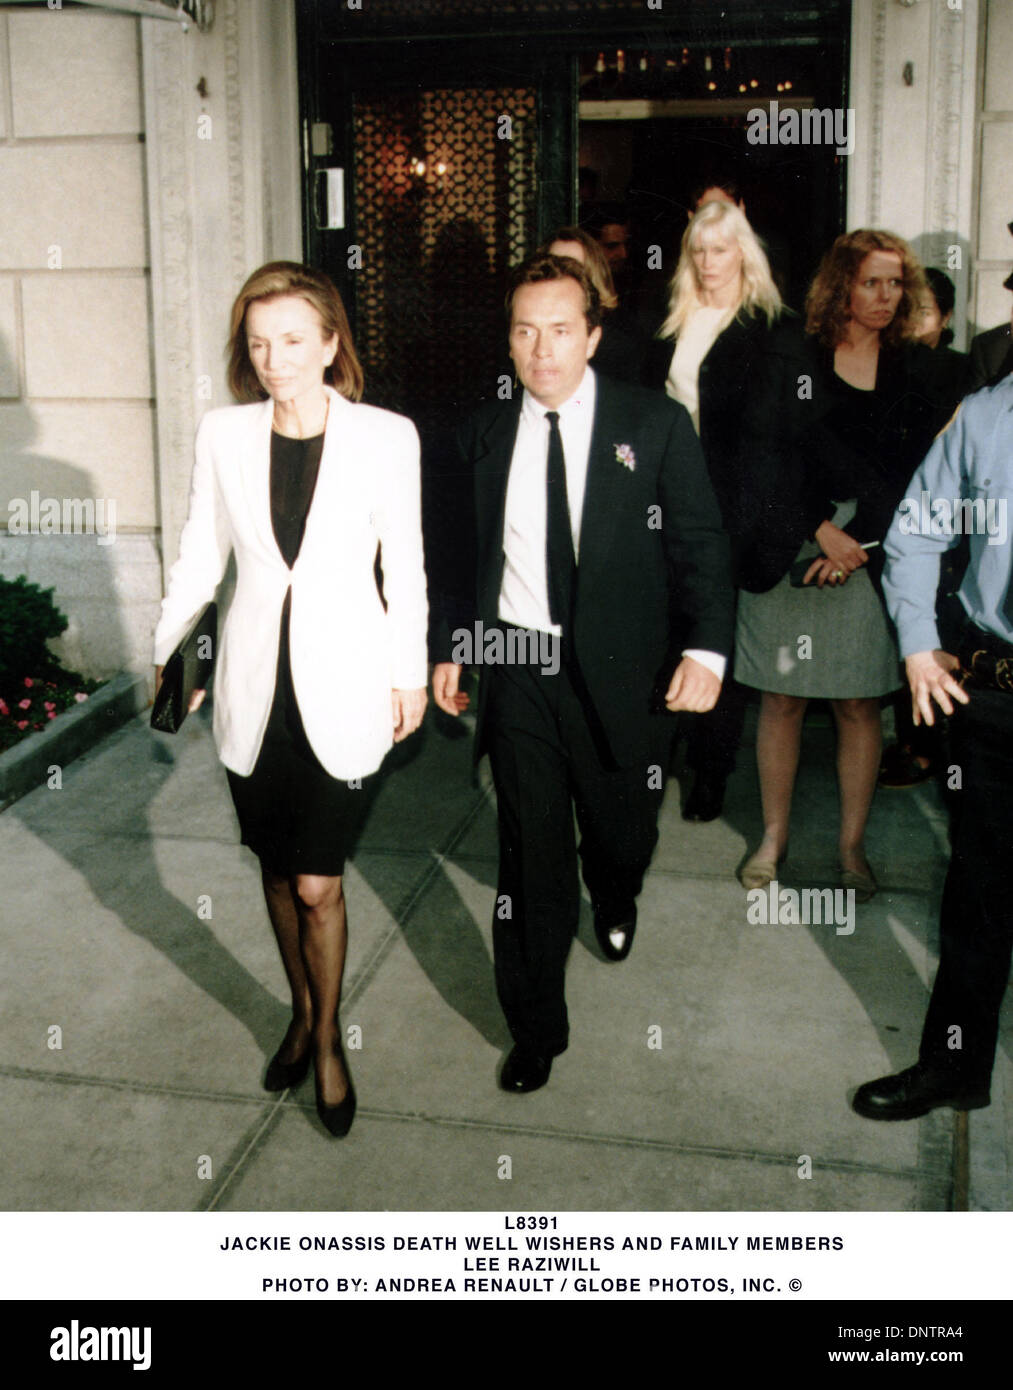 May 22, 1994 - L8391.JACKIE ONASSIS DEATH WELL WISHERS AND FAMILY MEMBERS.LEE RAZIWILL. ANDREA RENAULT (Credit Image: © Globe Photos/ZUMAPRESS.com) Stock Photo